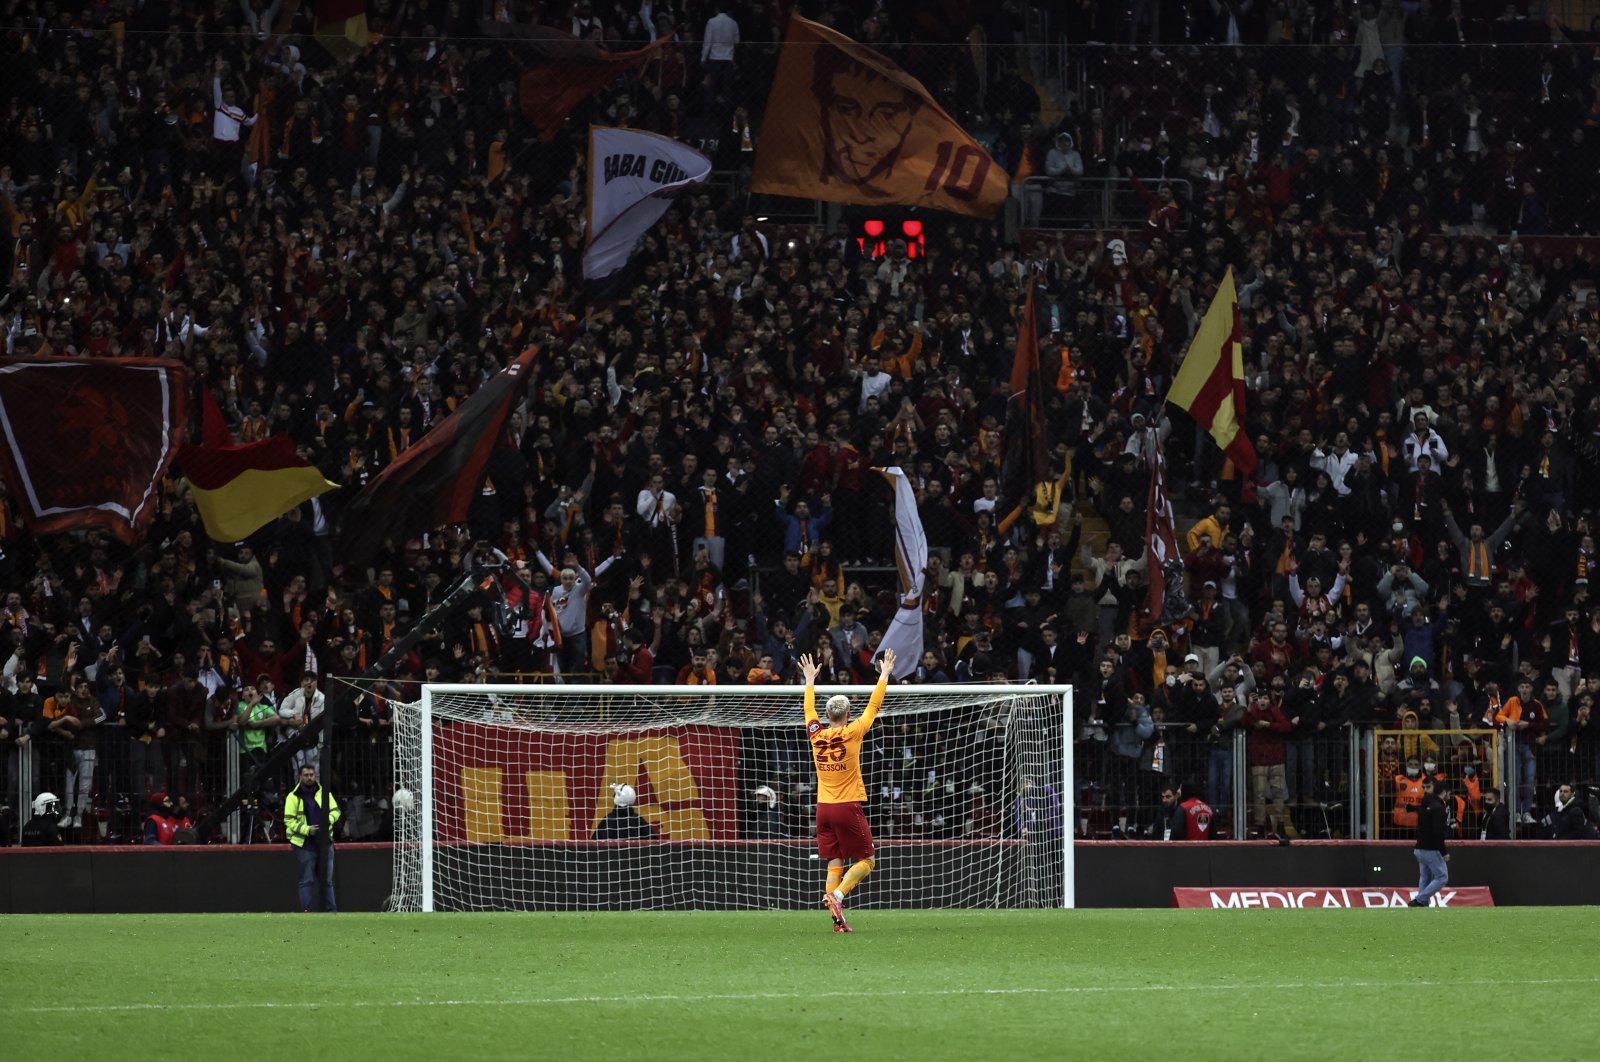 Galatasaray defender Victor Enok Nelsson, who excelled in the match with his performance, waves at fans after being applauded at the Lions&#039; Ali Sami Yen Sports Complex Nef Stadium on April 18, 2022. (AA Photo)